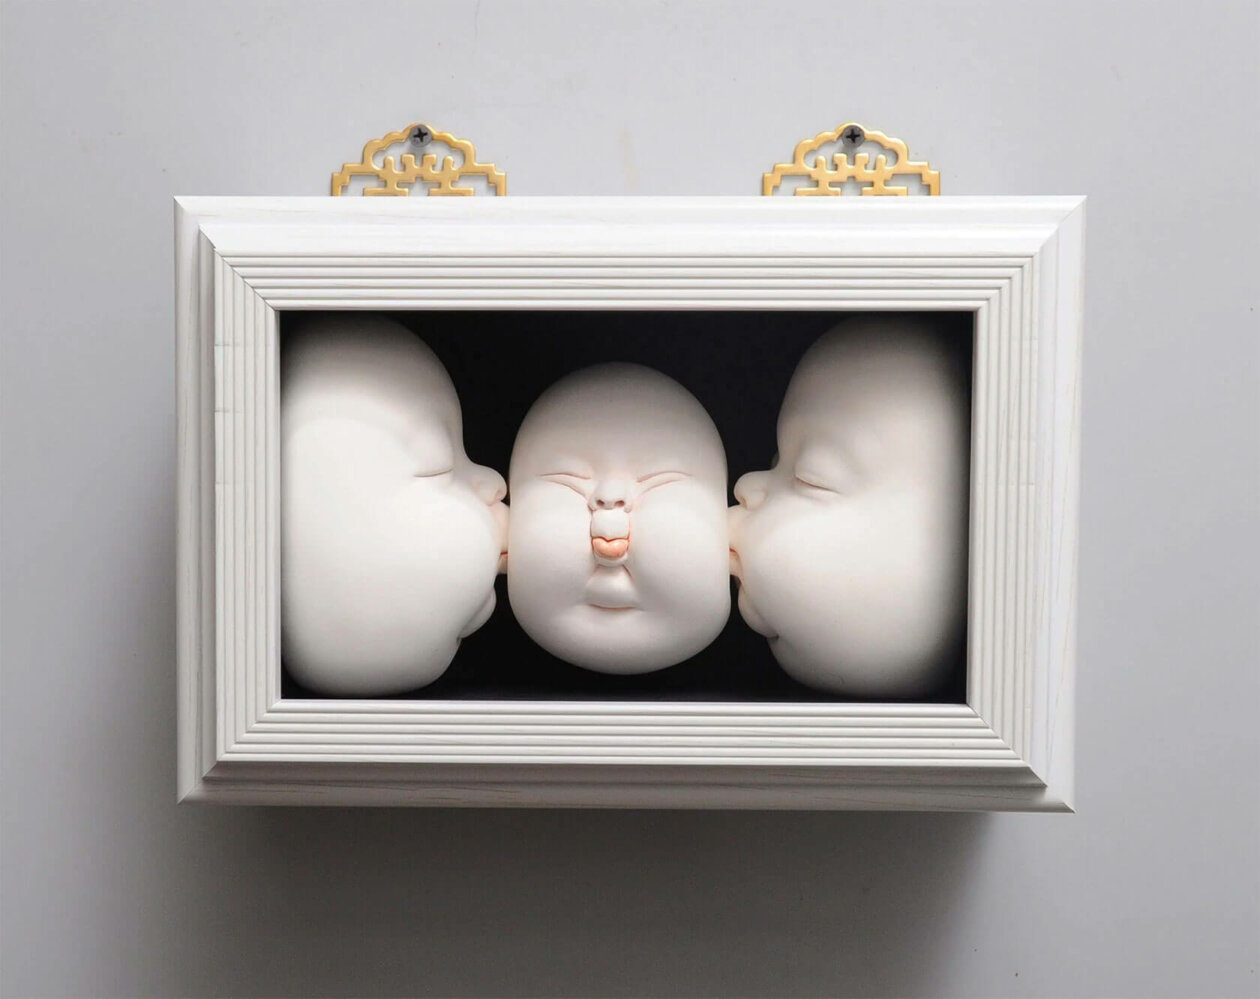 Distorted Baby Faces, Surreal Ceramic Sculptures By Johnson Tsang (28)